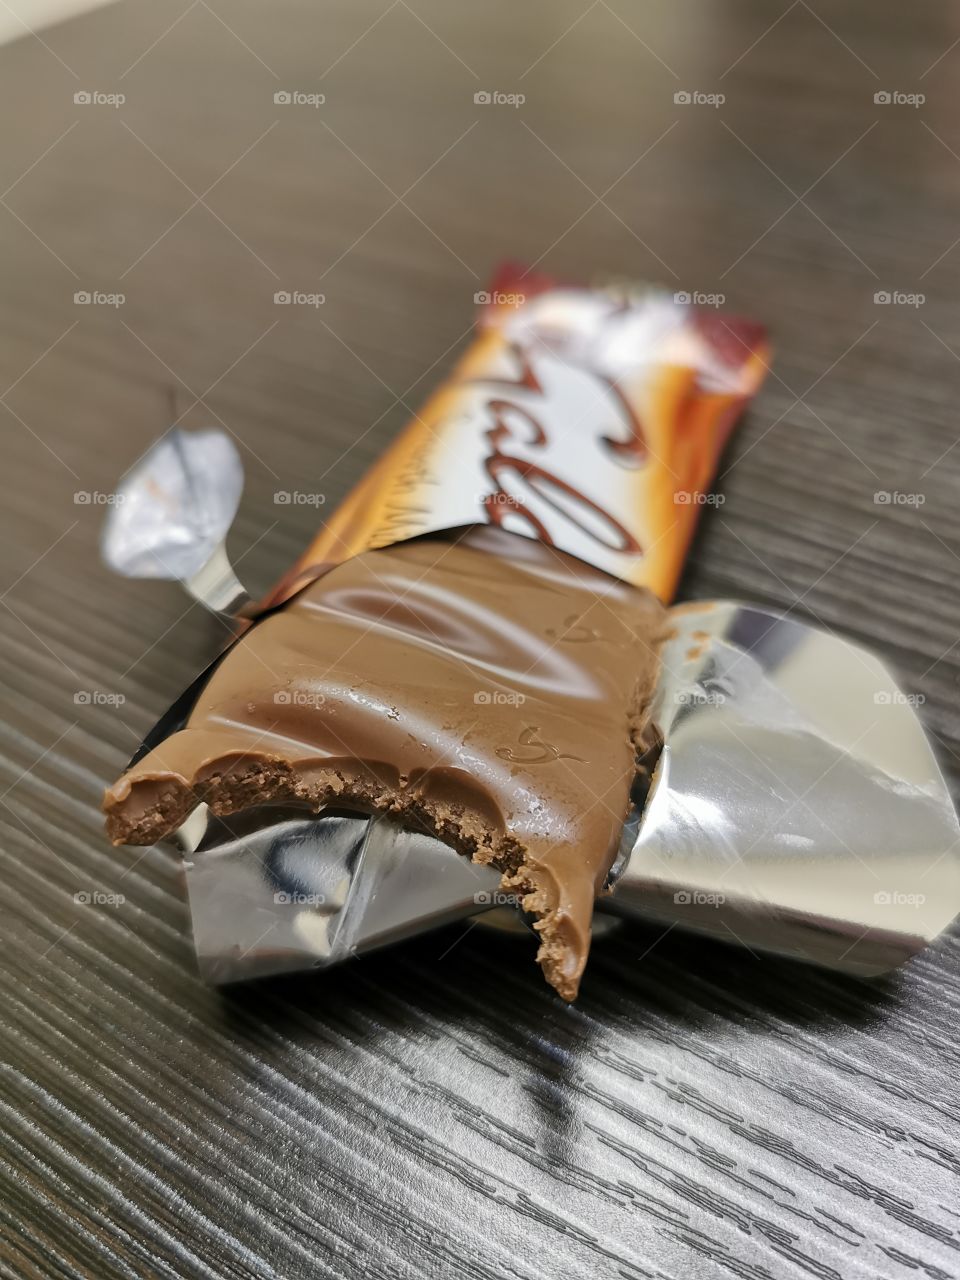 Chocolate after a bite